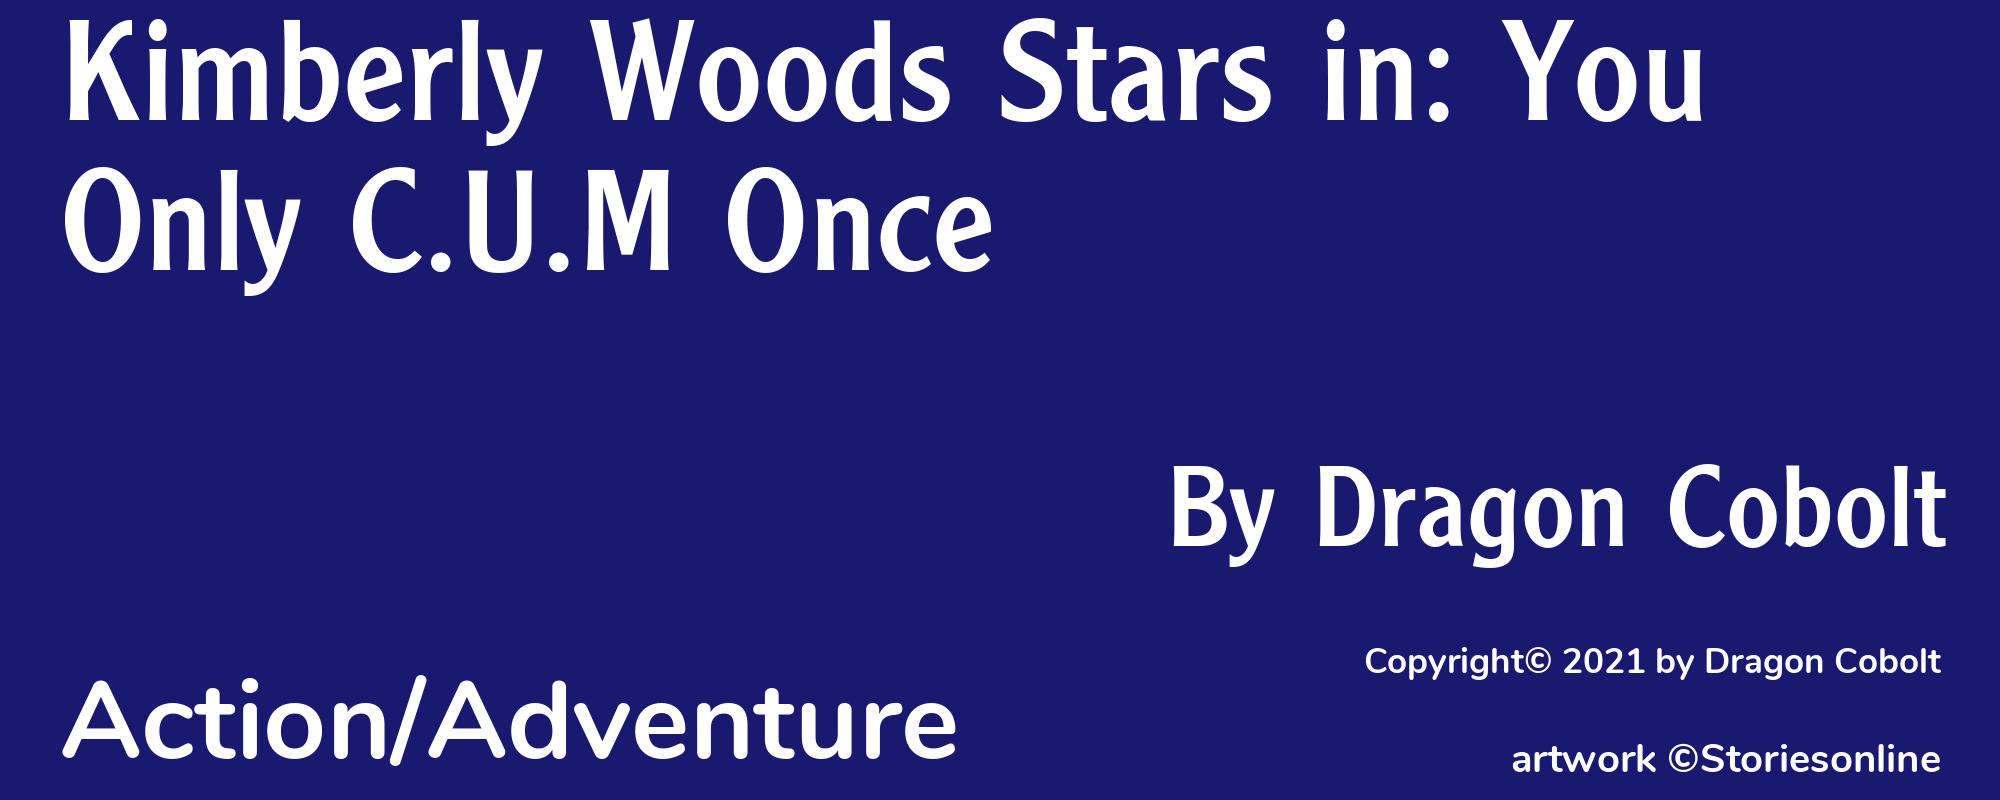 Kimberly Woods Stars in: You Only C.U.M Once - Cover